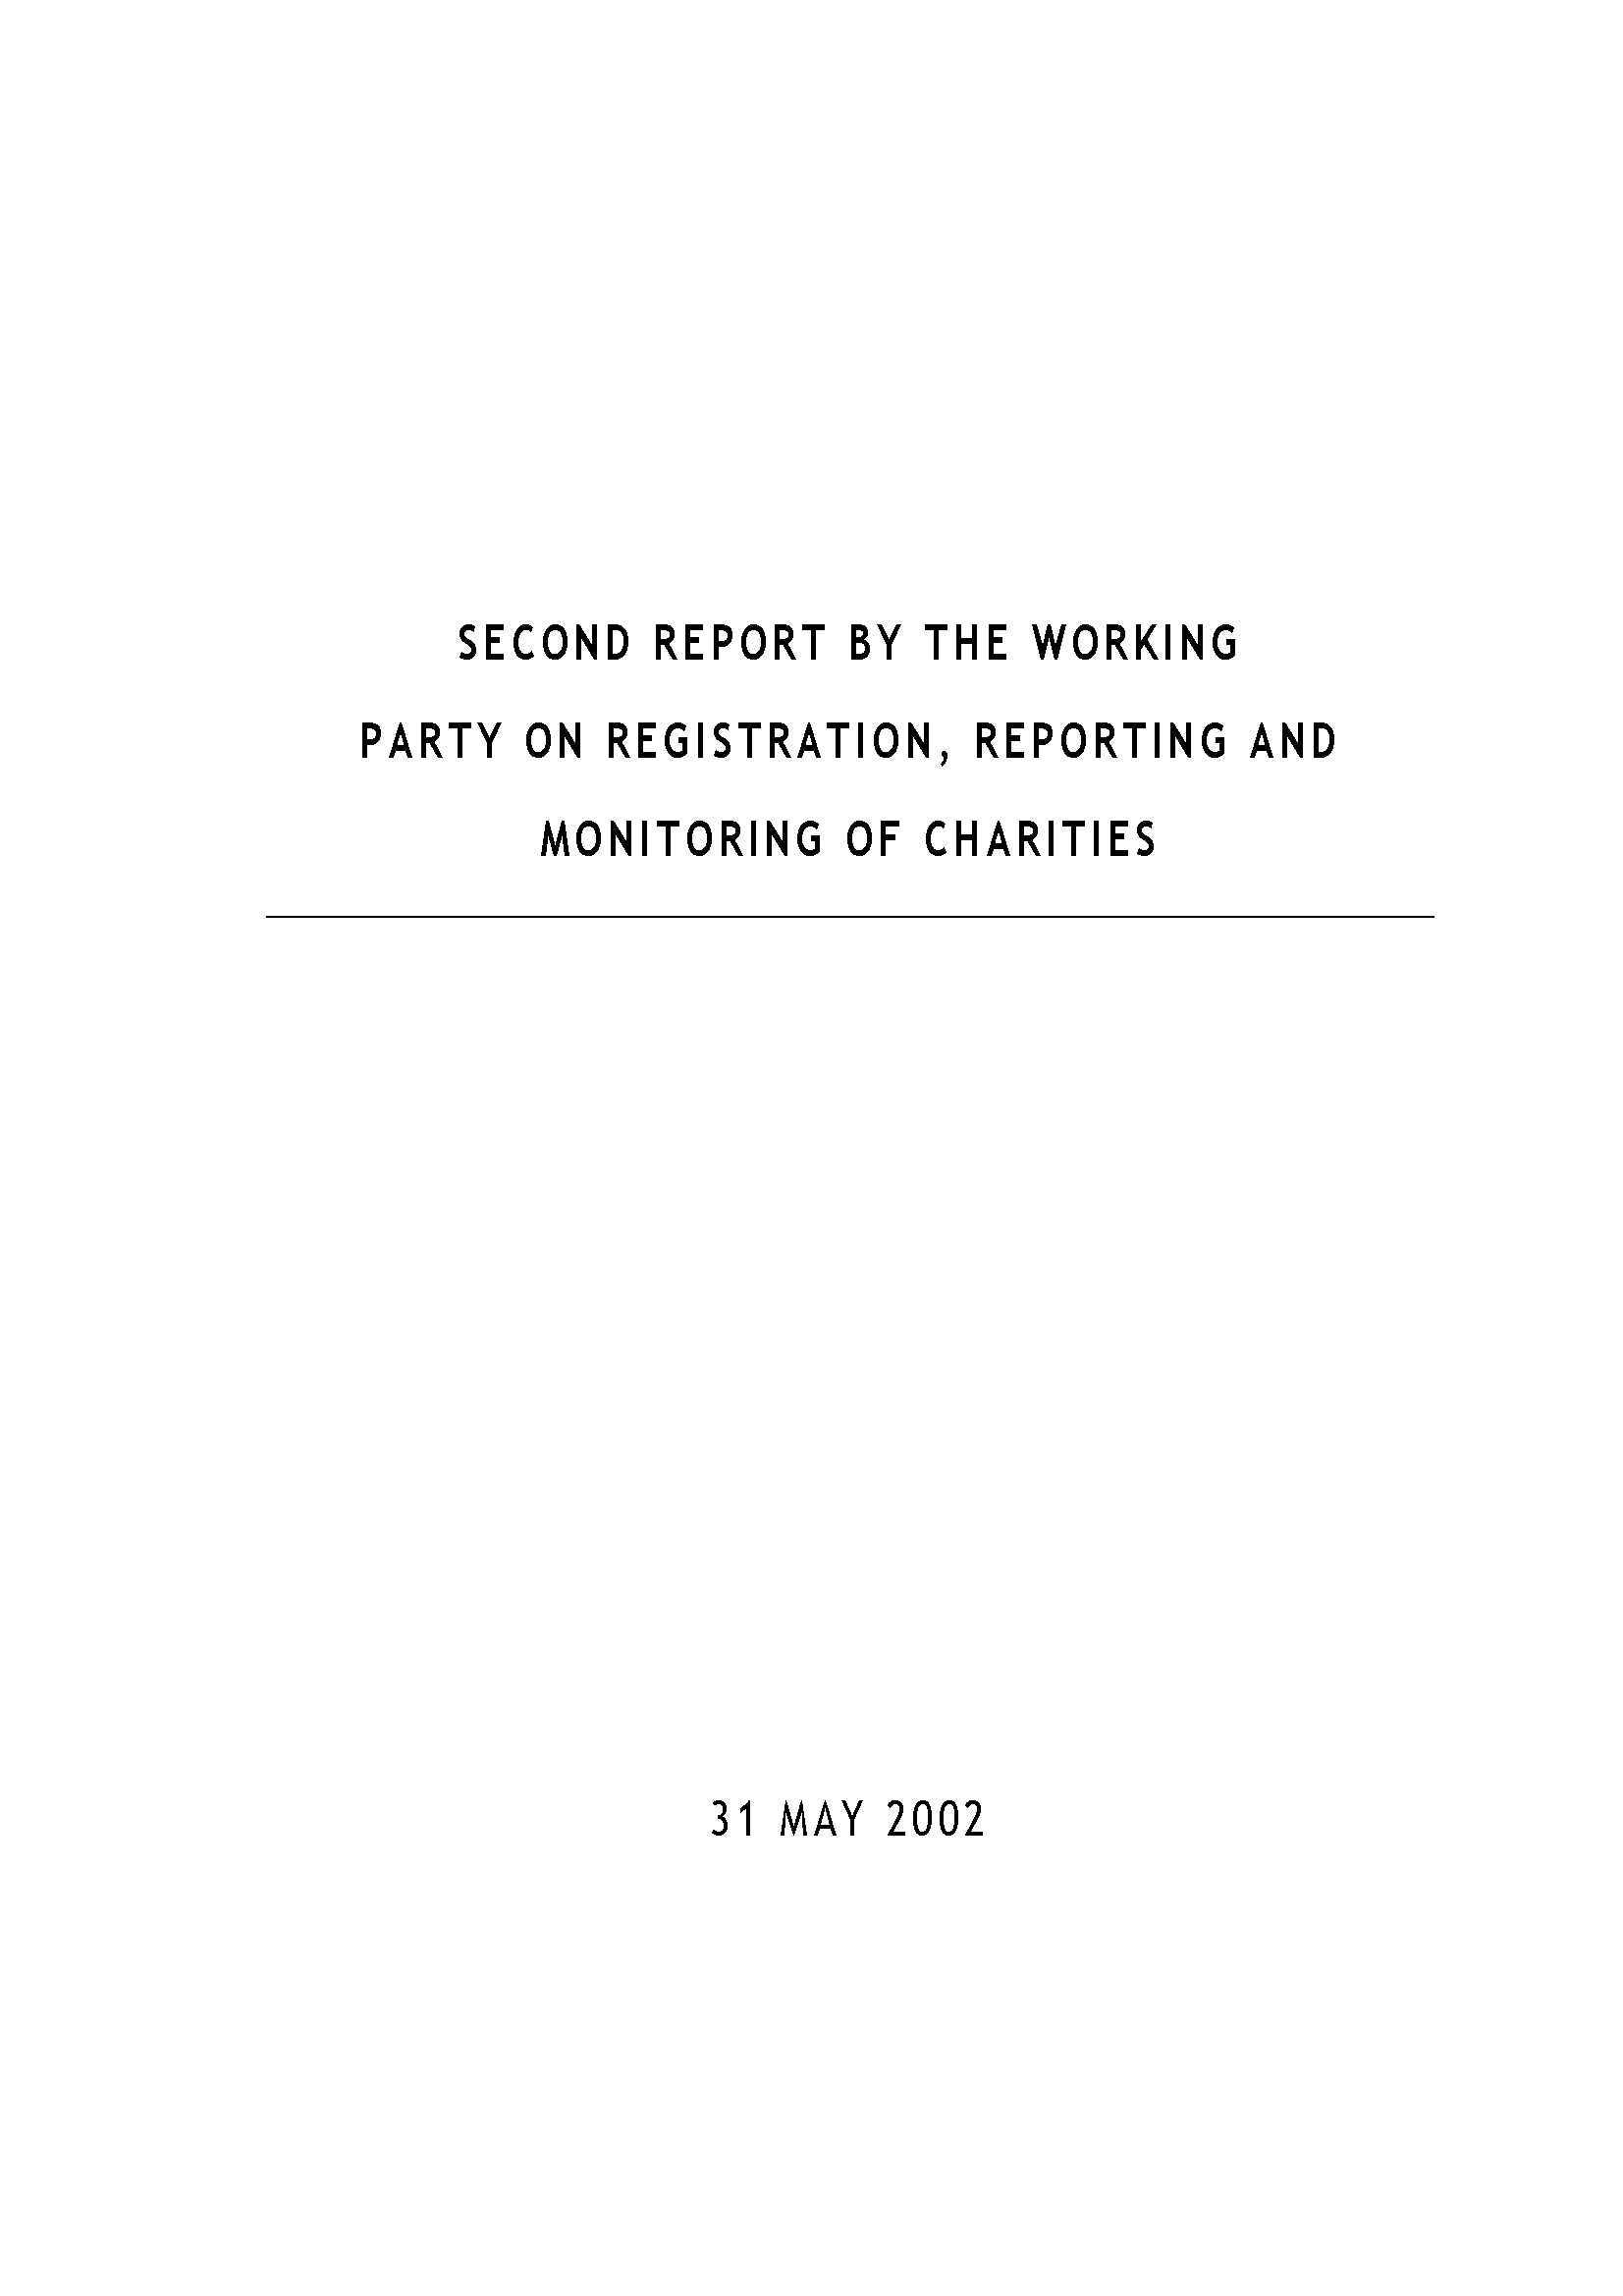 Publication cover page, Title = Second report by the Working Party on Registration, Reporting and Monitoring of Charities (31 May 2002)